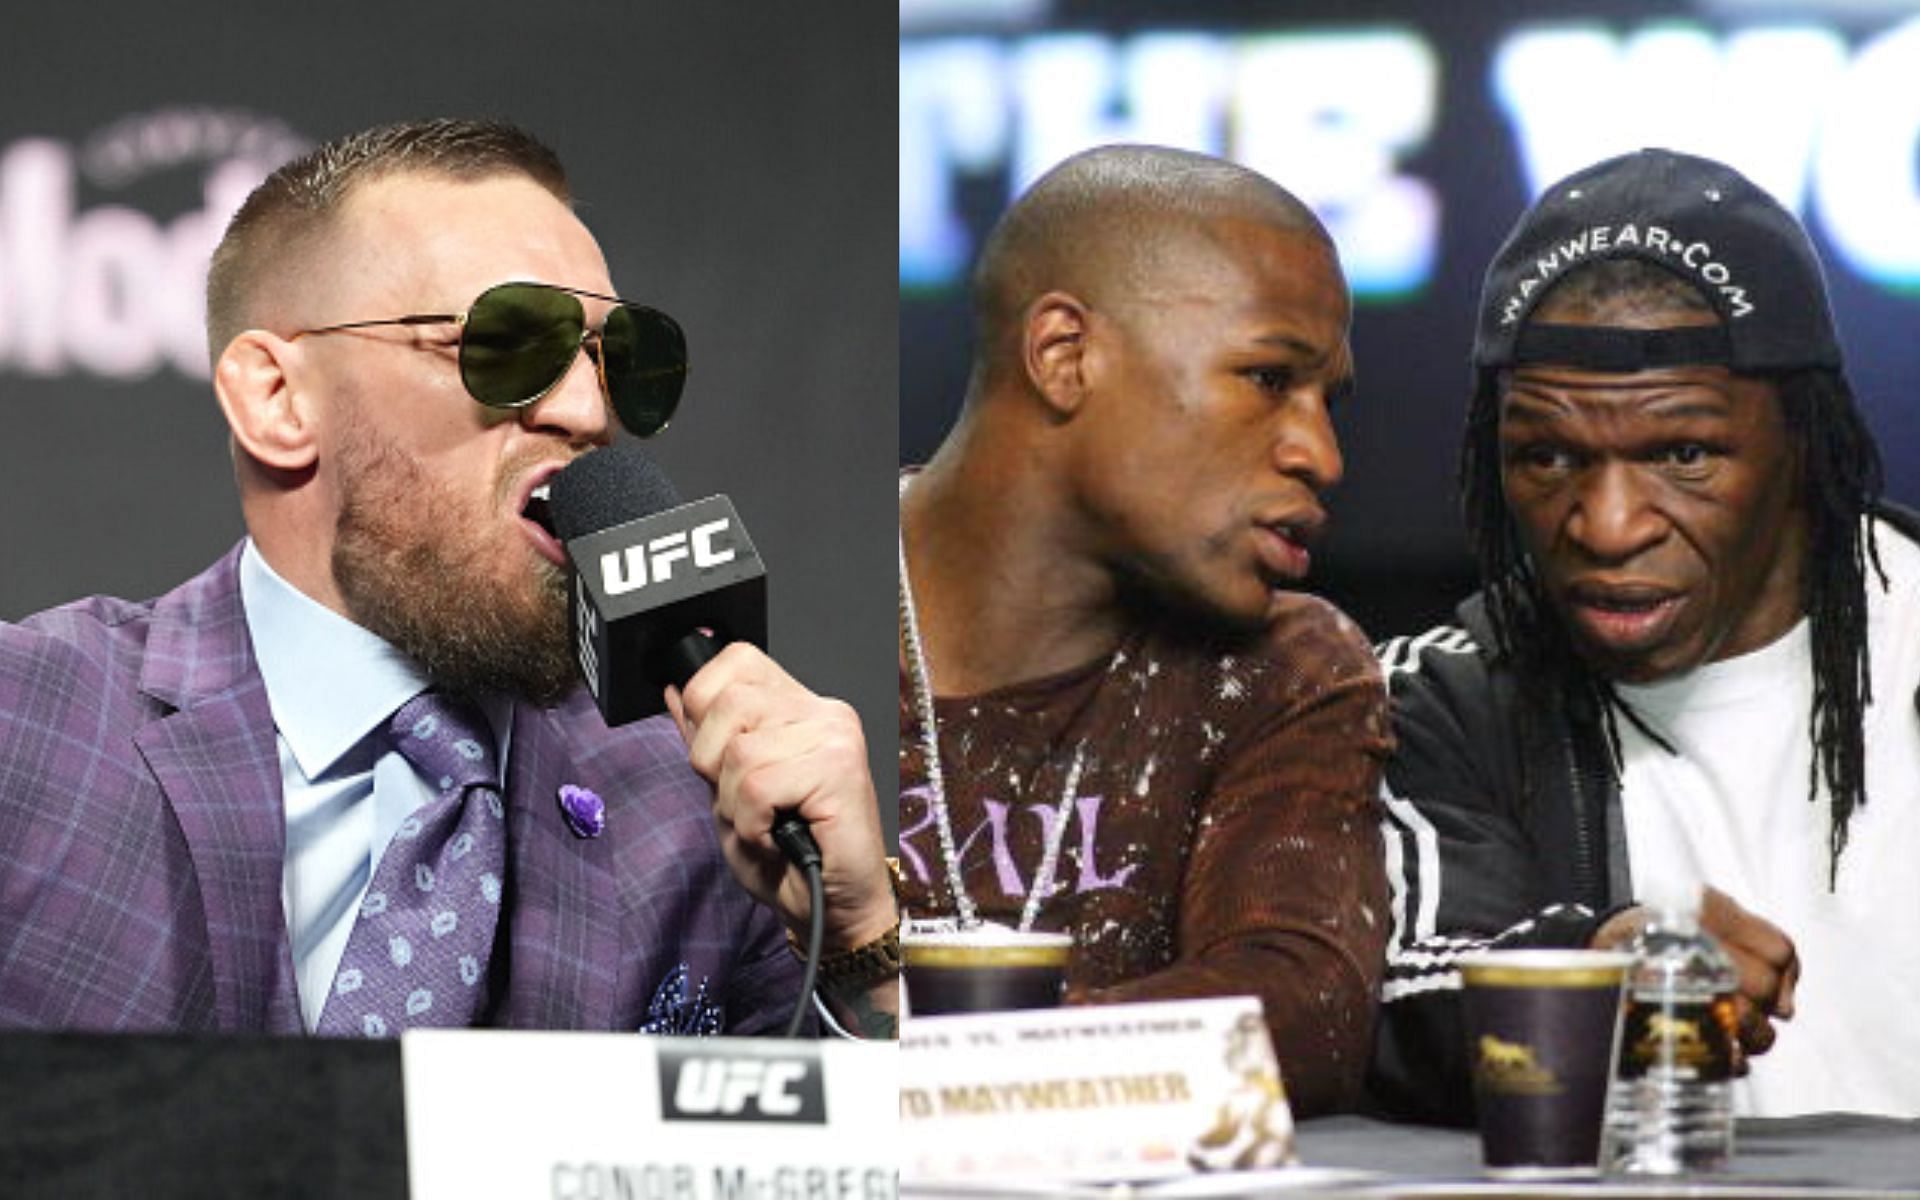 Conor McGregor (left), Floyd Mayweather Jr with father (right) [Images courtesy: Getty]